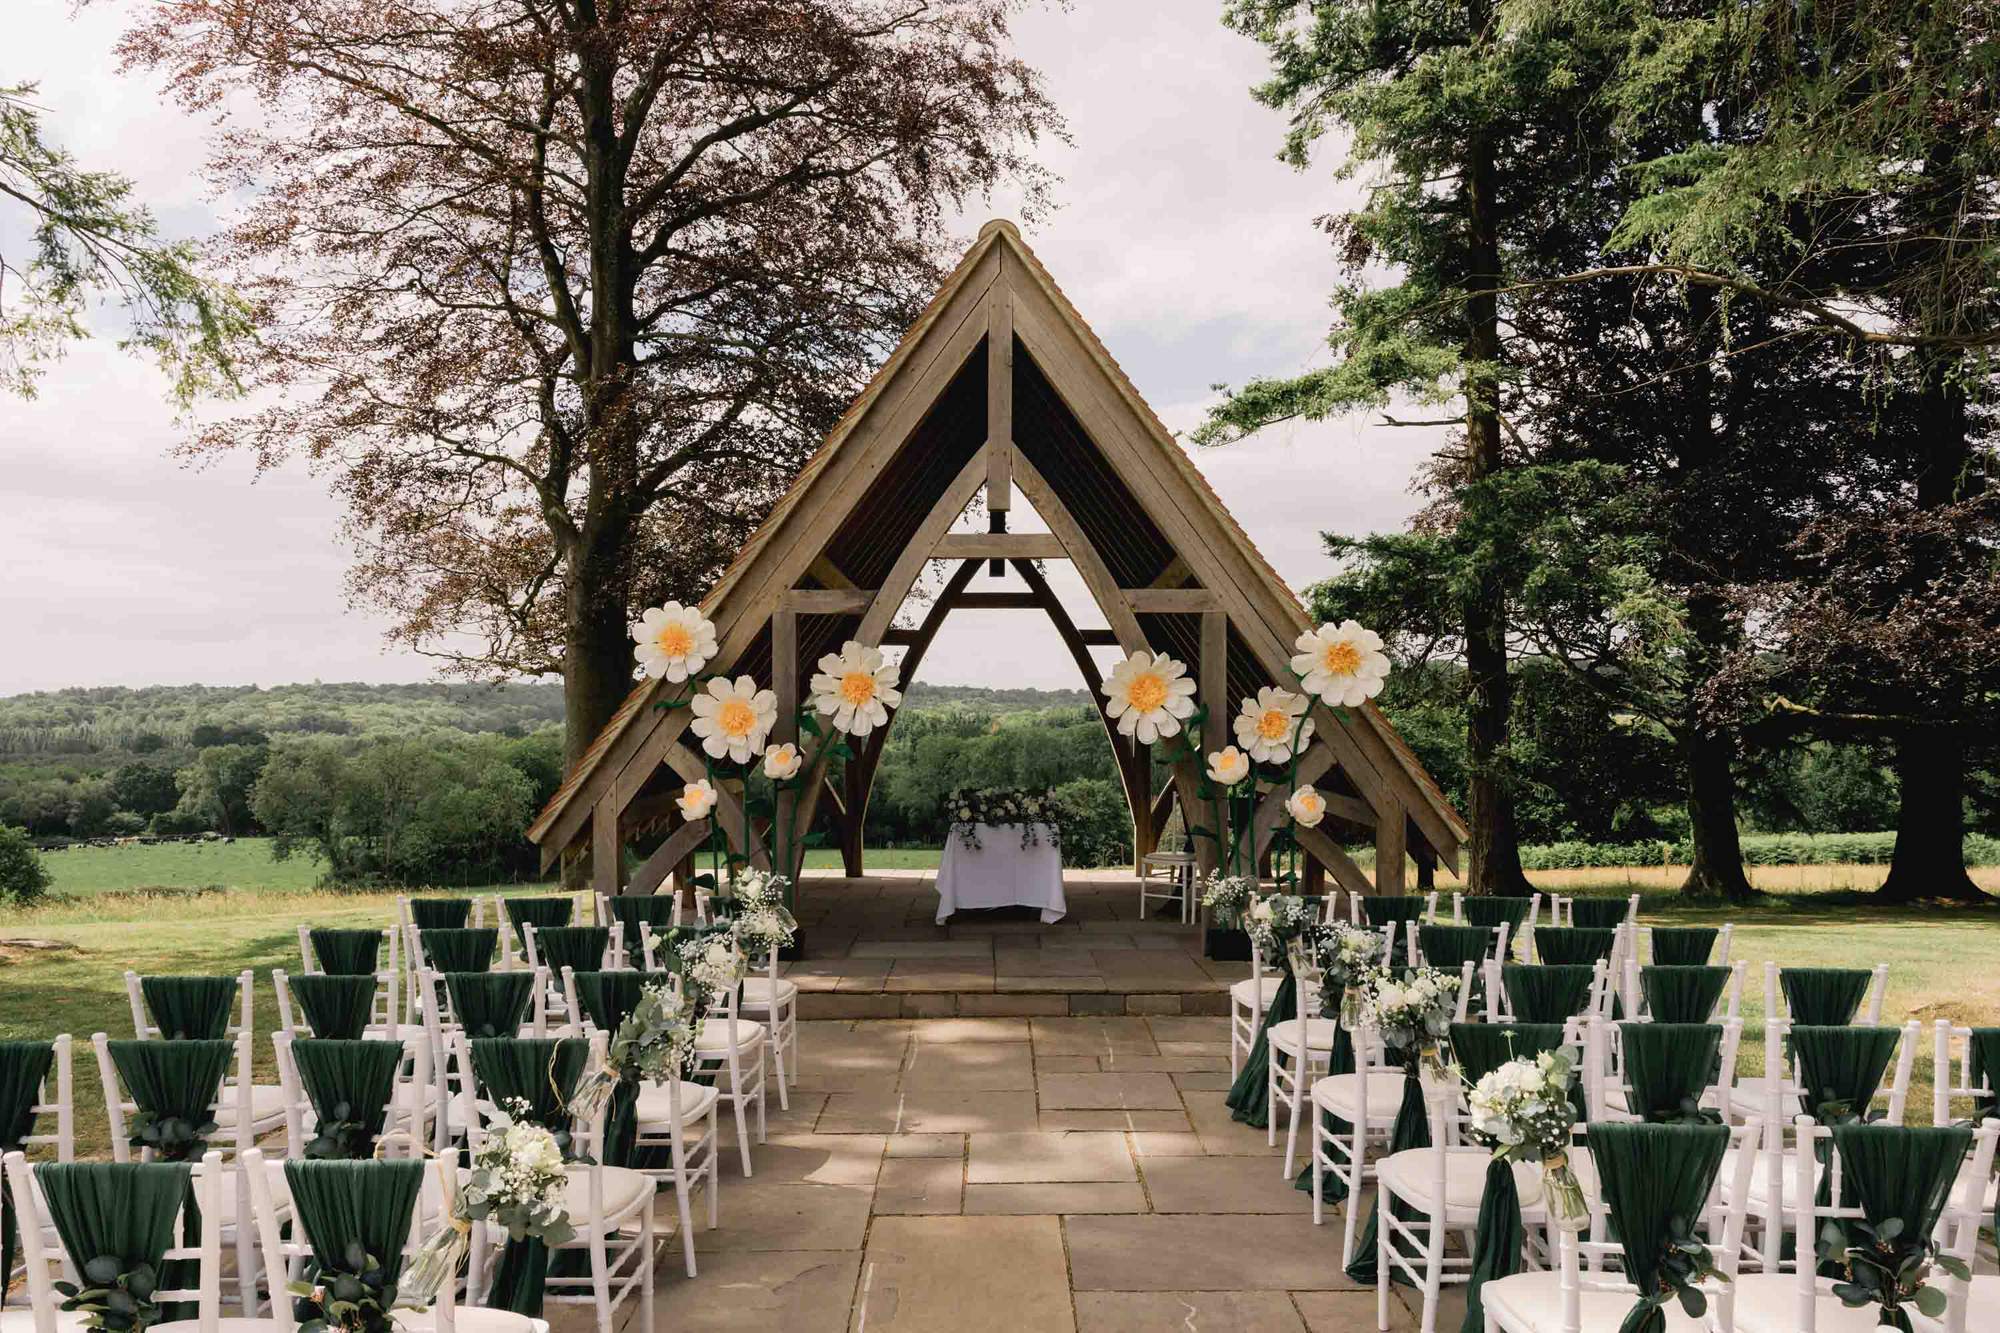 Outdoor ceremony set up at Highley Manor wedding venue with panoramic views across the Sussex countryside.